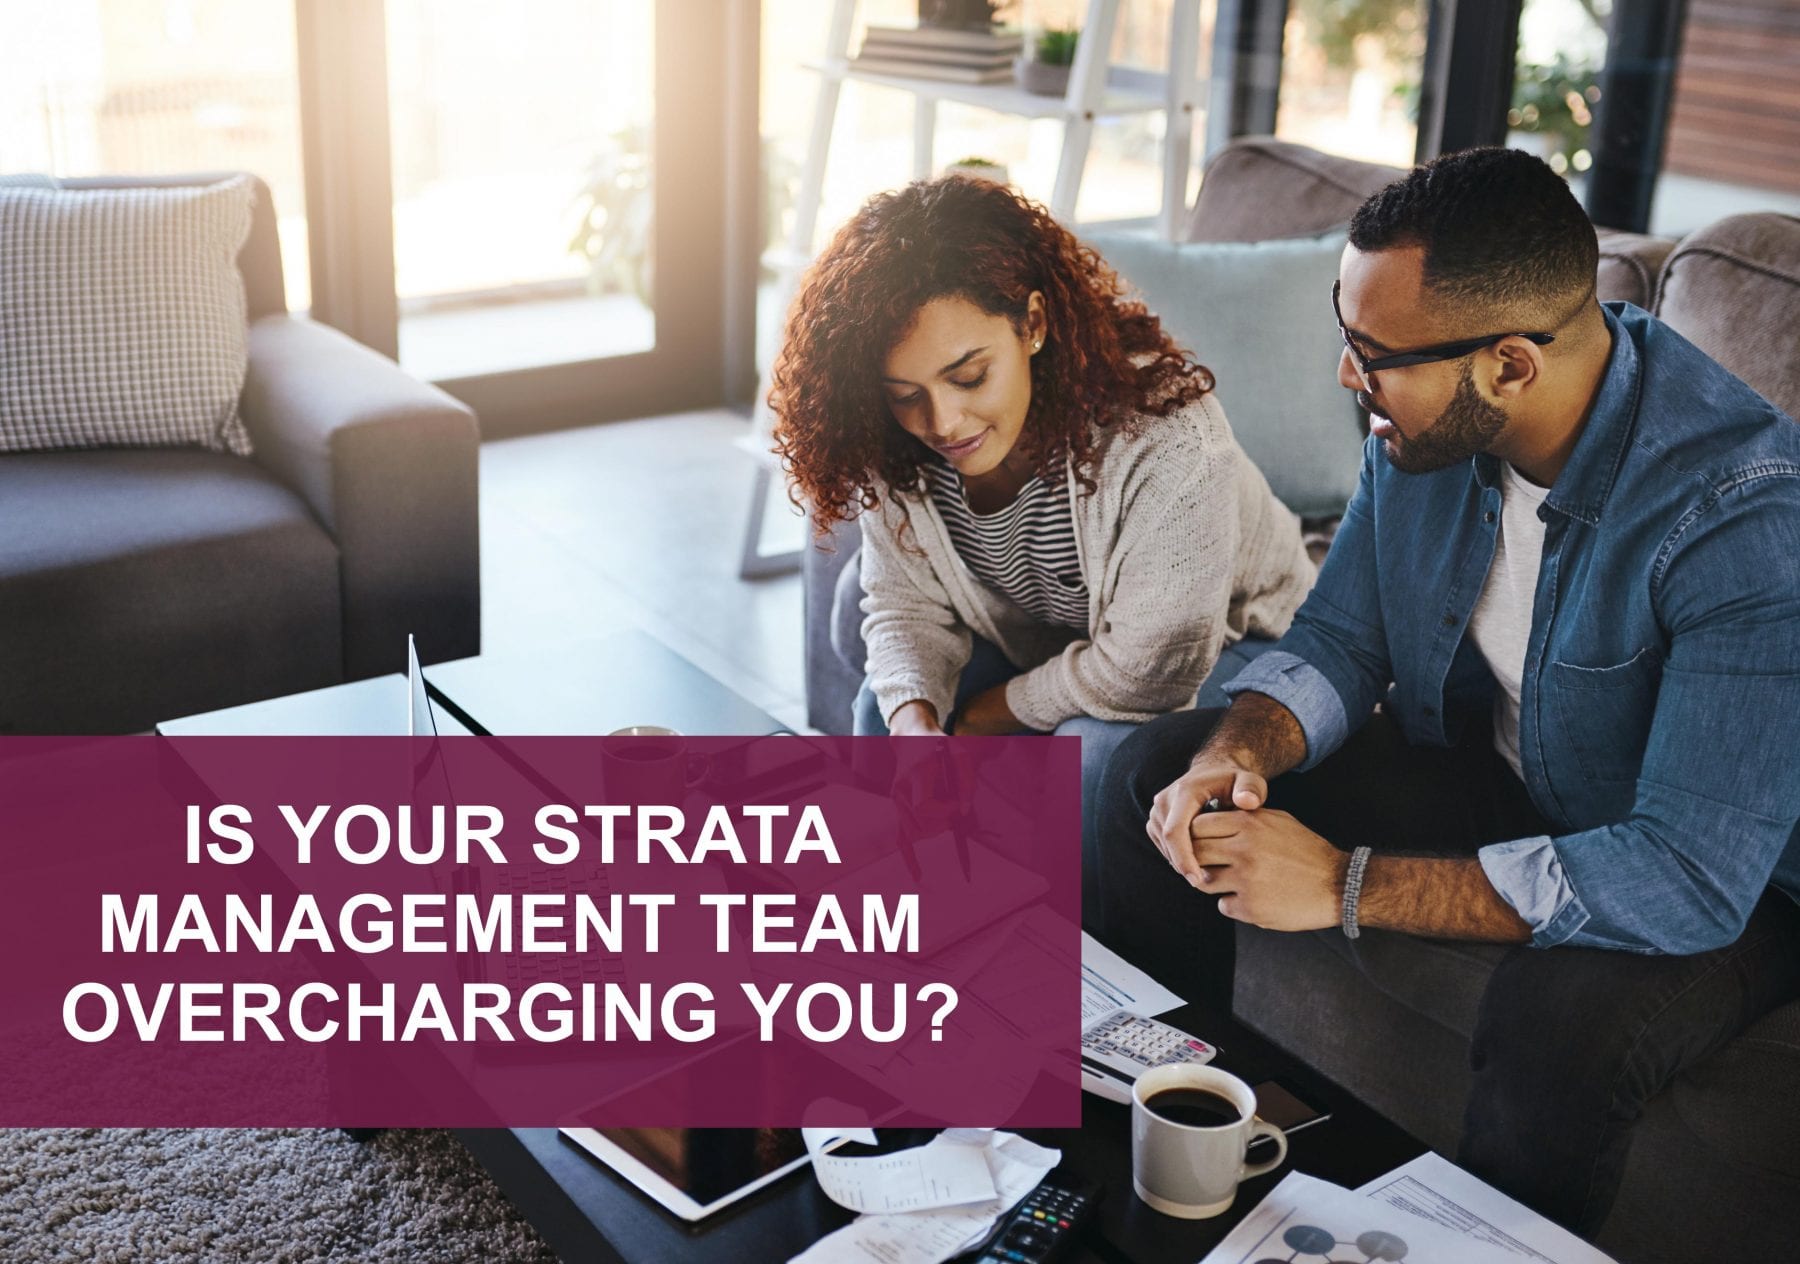 Being Overcharged by Strata Management Team